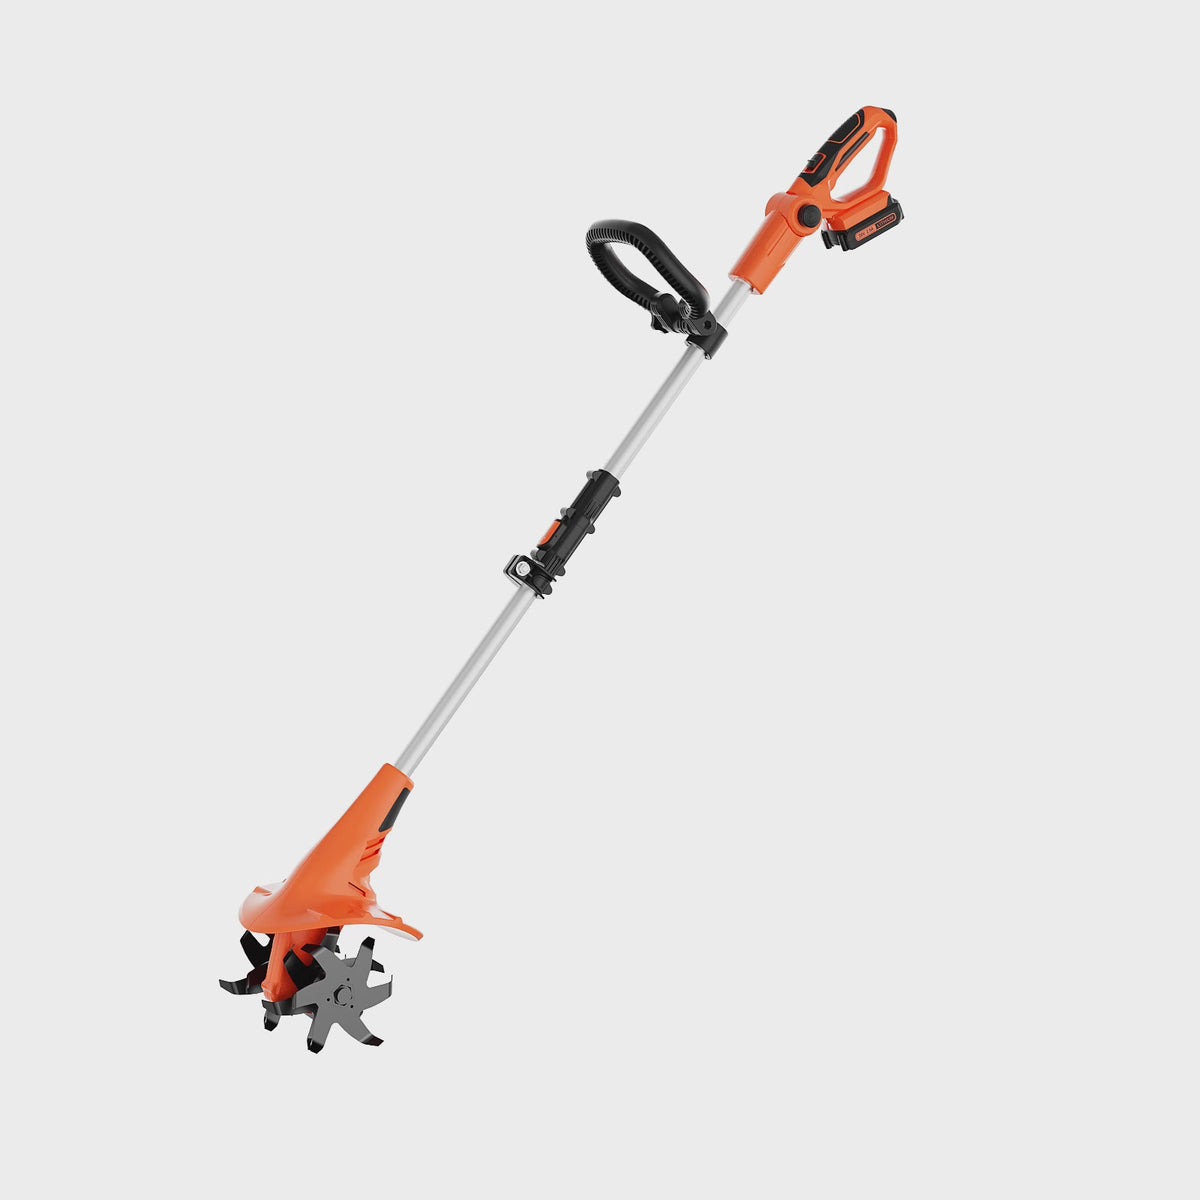  Ukoke Cordless Tiller Cultivator 280 max RPM Powered Tiller  Cultivator, w/24 Steel Blade Cultivate Max Tilling 5'' deep Path by 7.8''  Wide, Orange, Tool Only, ST1902-T : Patio, Lawn 